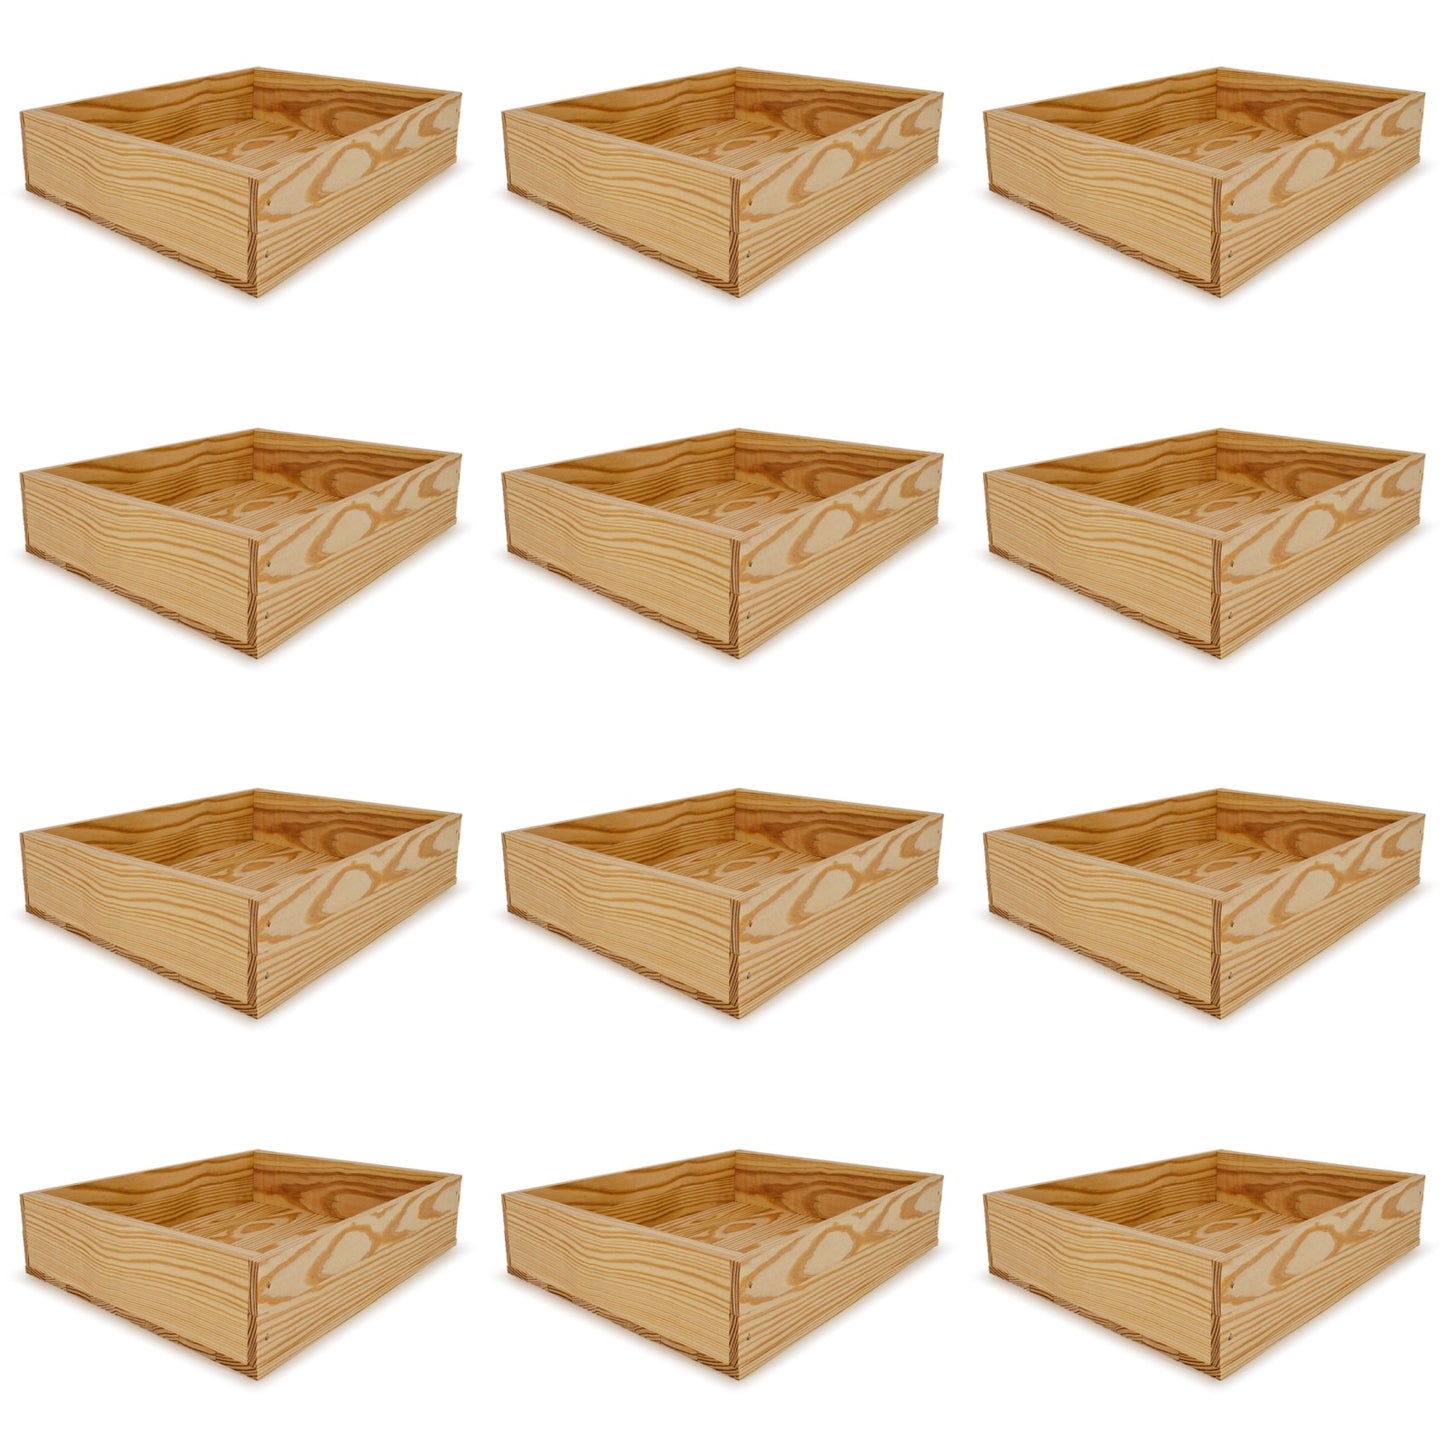 12 Small wooden crates 16x13.25x3.5